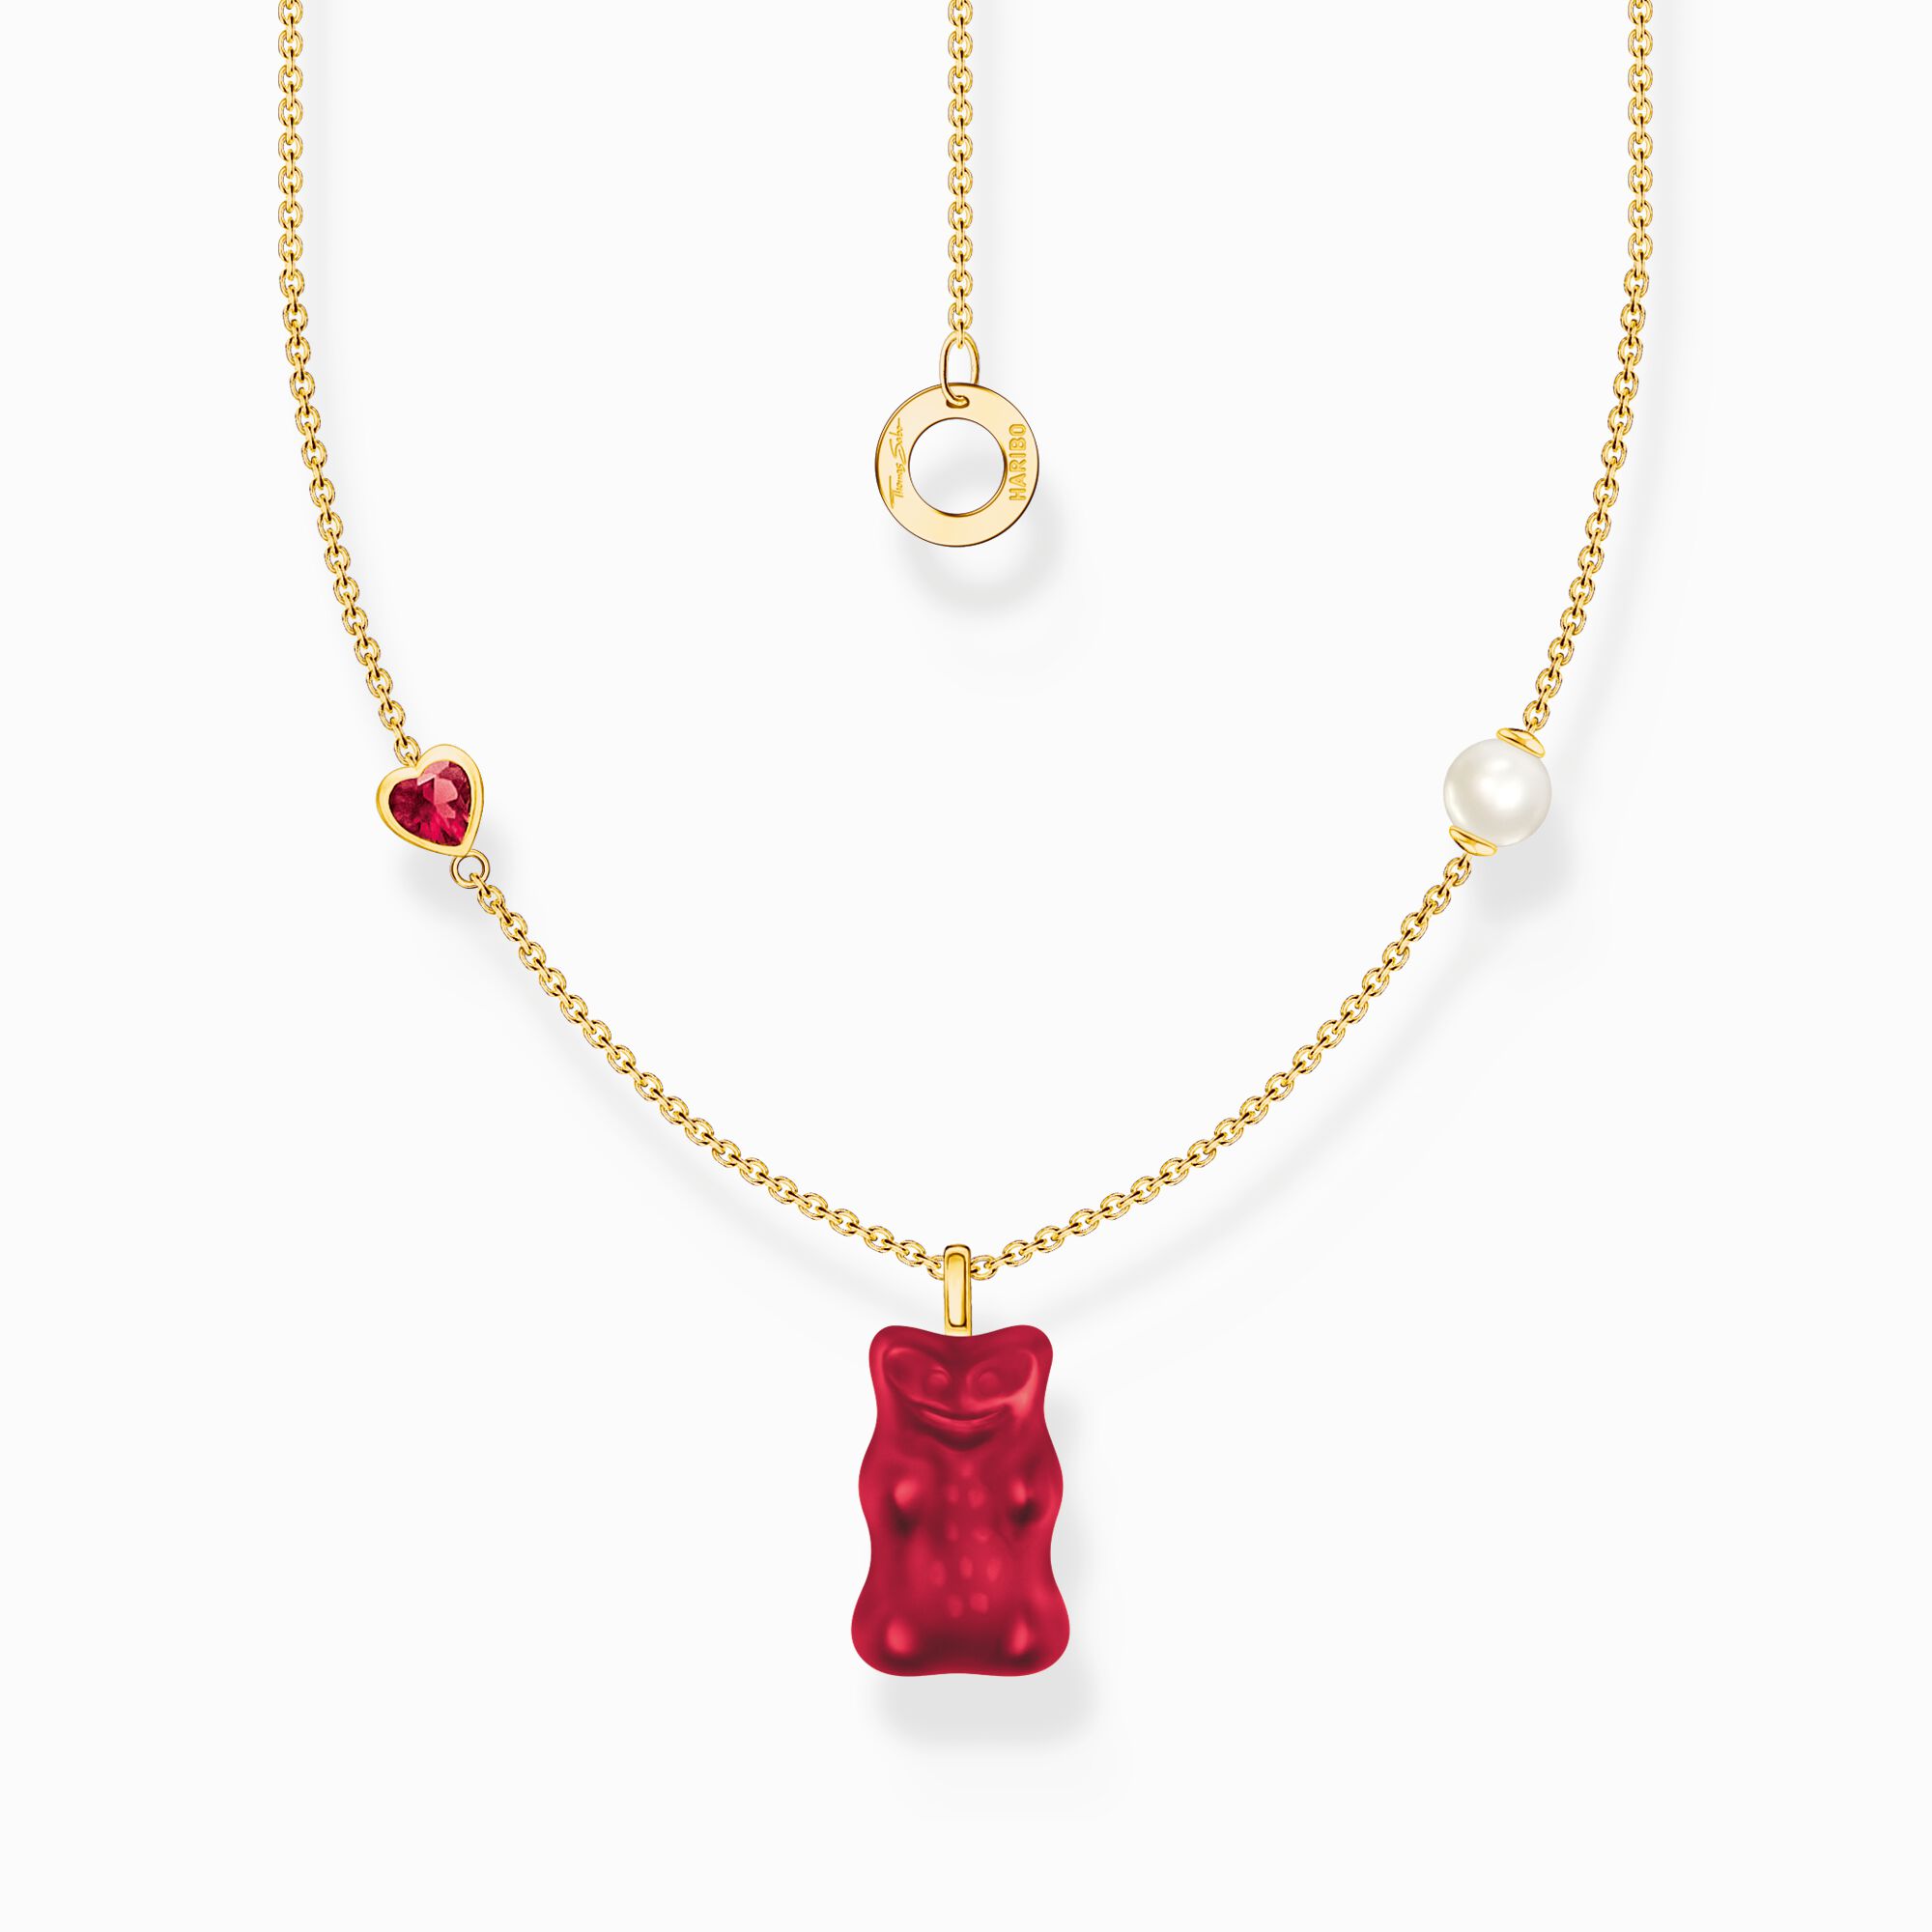 Gold-plated necklace with red goldbears pendant &amp; freshwater pearl from the Charming Collection collection in the THOMAS SABO online store